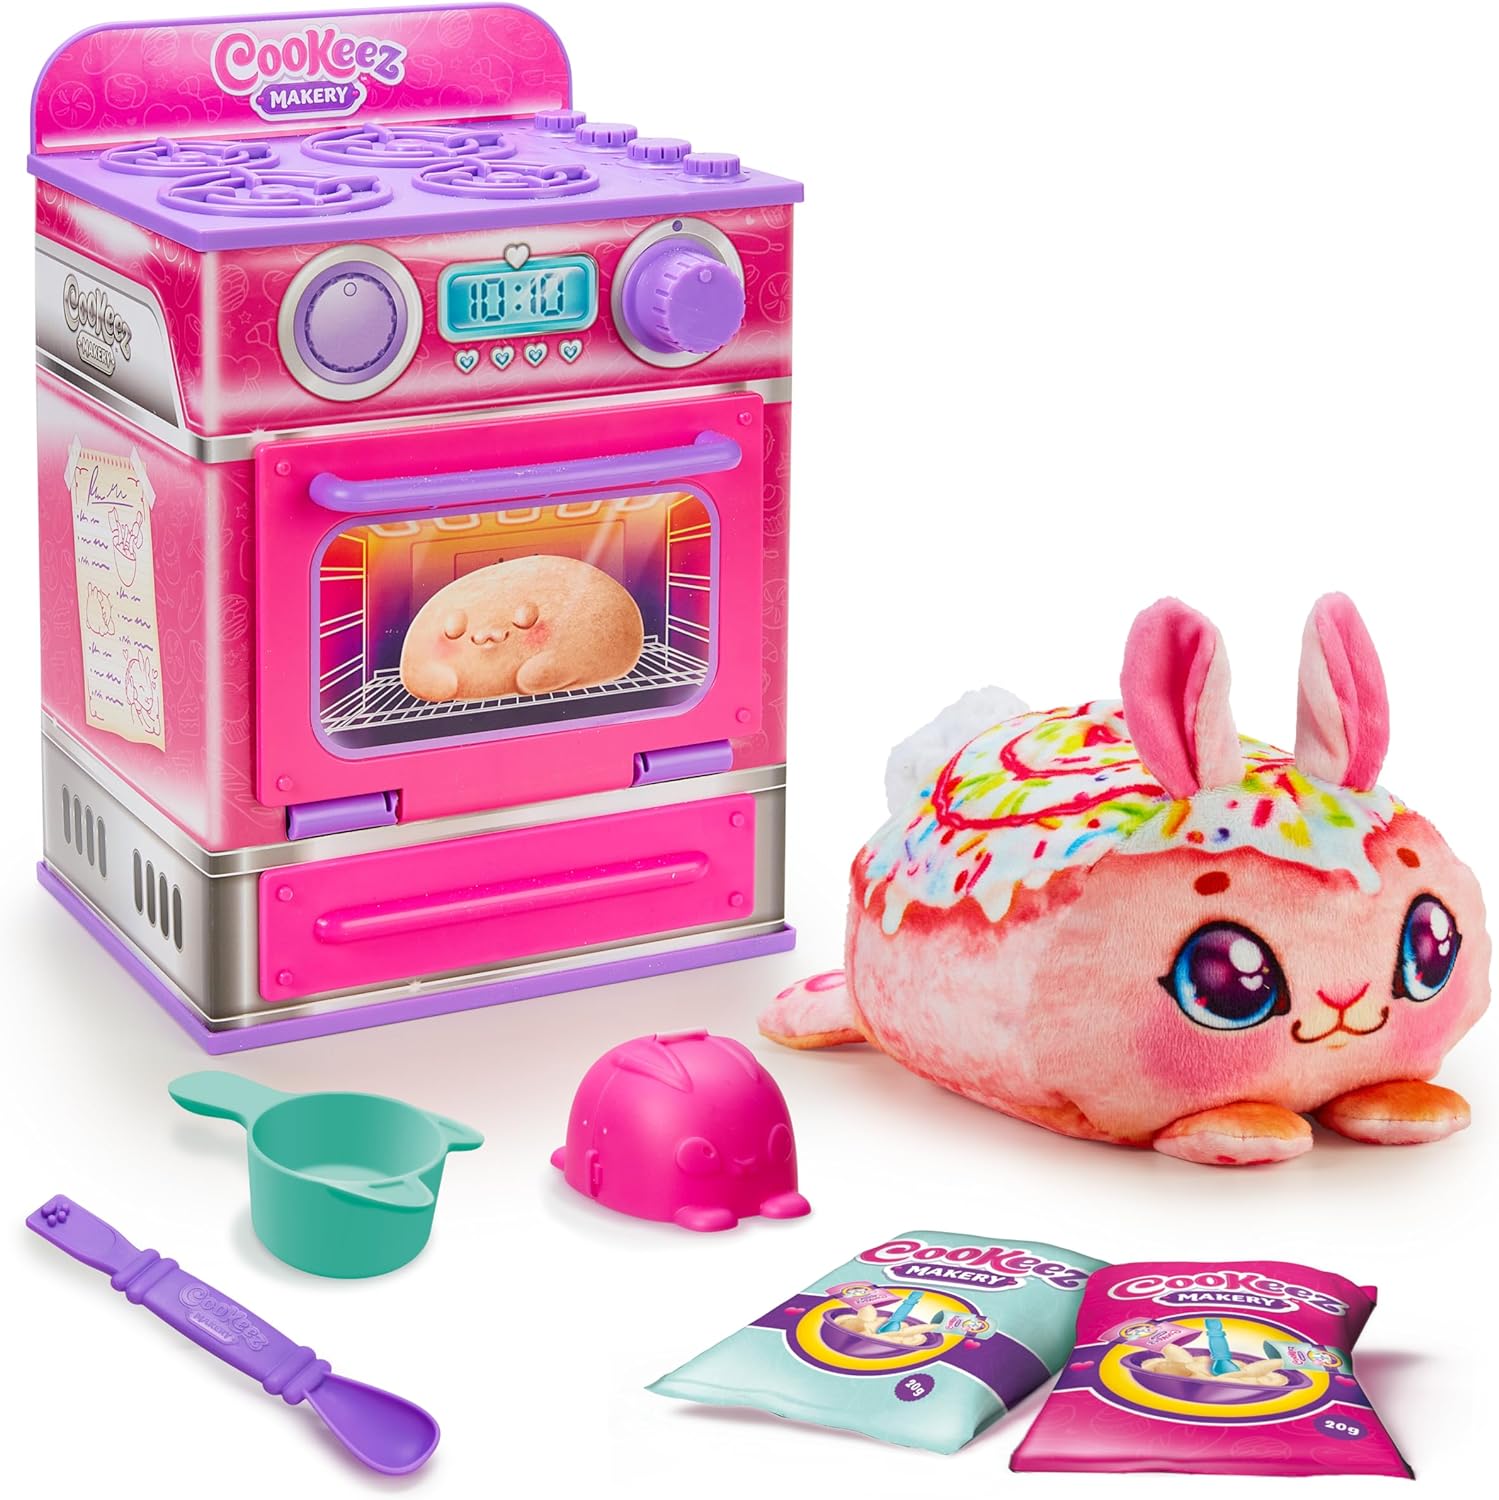 COOKEEZ MAKERY Cinnamon Treatz Oven. Mix & Make a Plush Best Friend! Place Your Dough in The Oven and Be Amazed When A Warm, Scented, Interactive, Friend Comes Out! Which Will You Make?